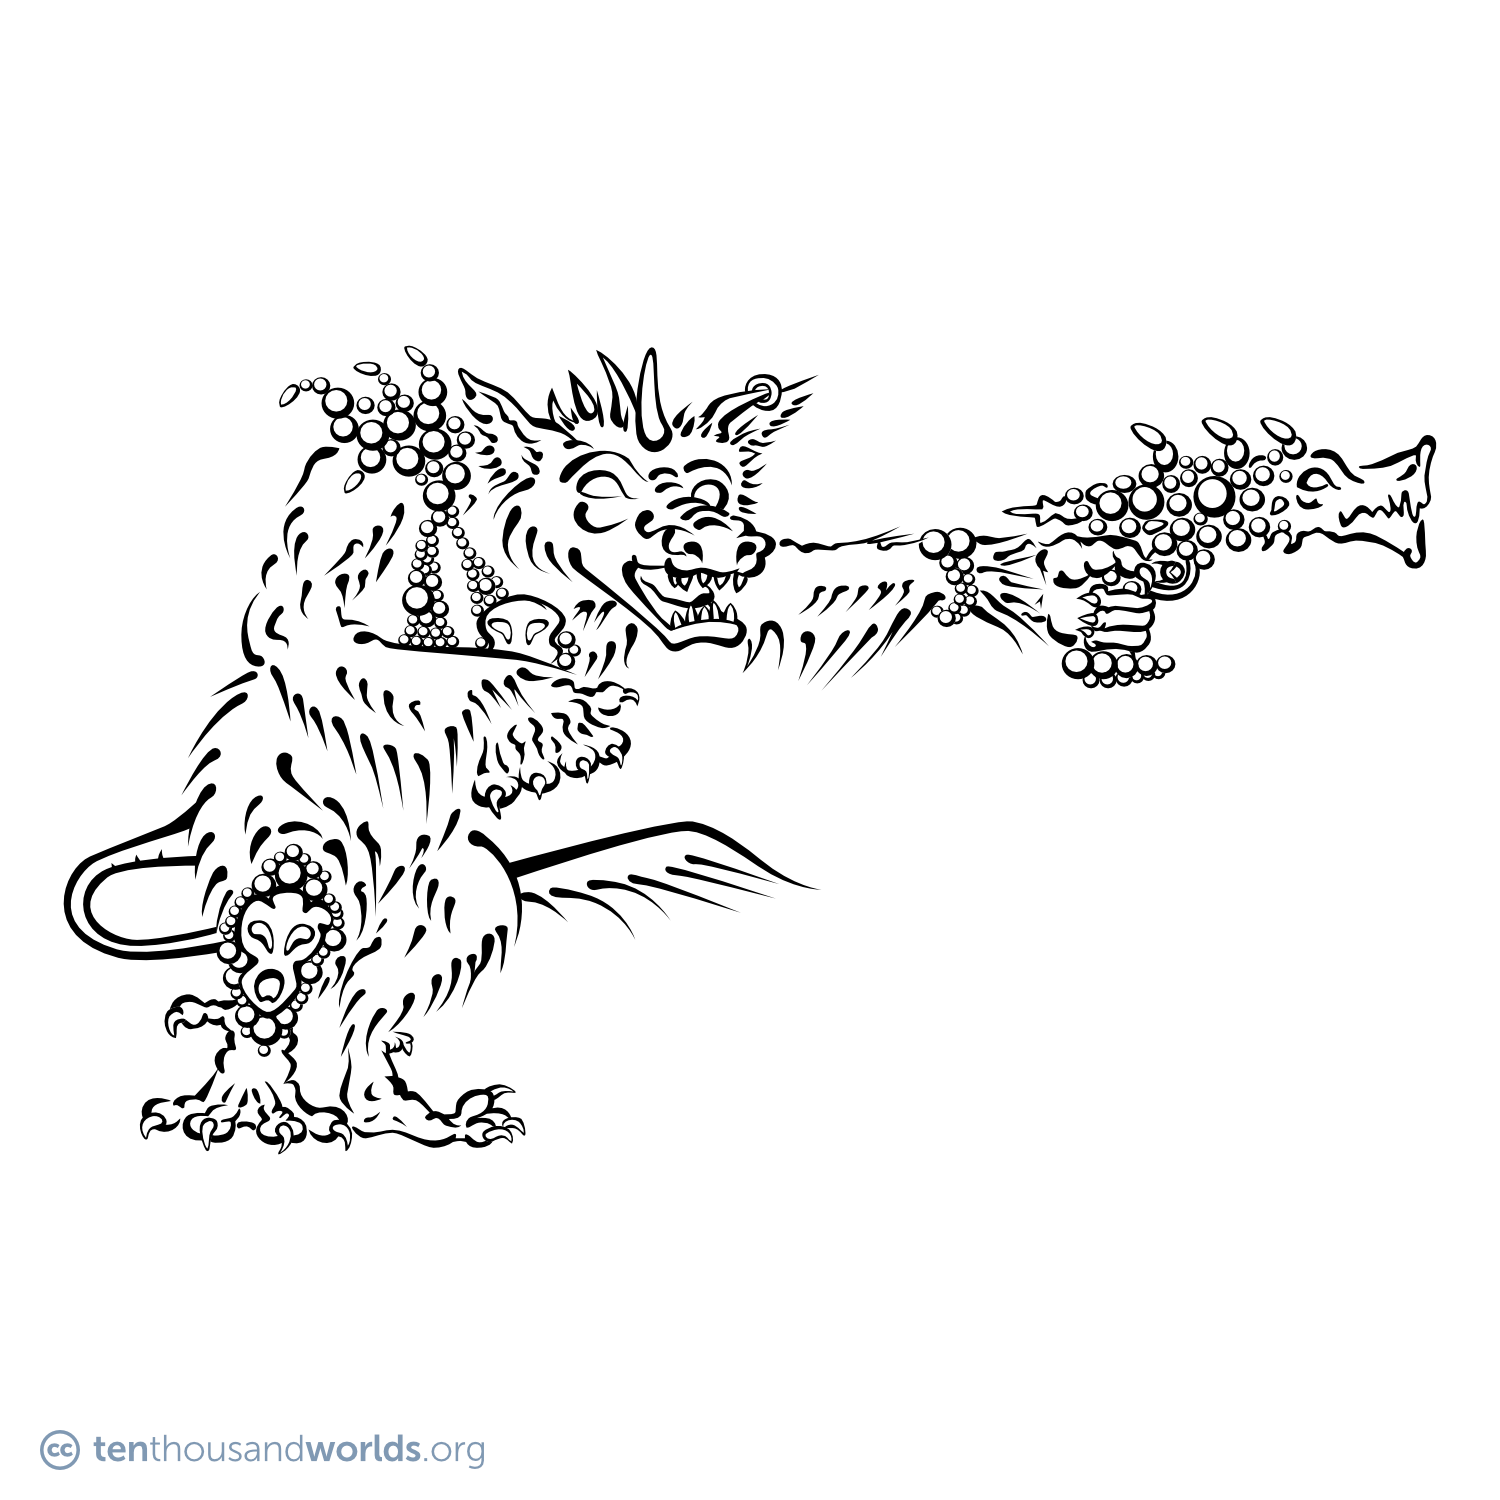 An ink outline of an upright furry creature resembling some sort of fox or hyena with a row of spikes across the top of its head. It wears an ear ring, armor on the right shoulder, a bracelet, and a right shin guard —all of which seem to be made out of bubbles with the occasional face coming through. The creature points a wide-barreled gun, constructed in a similar manner, which resembles a cross between a warthog and a spiny fish.